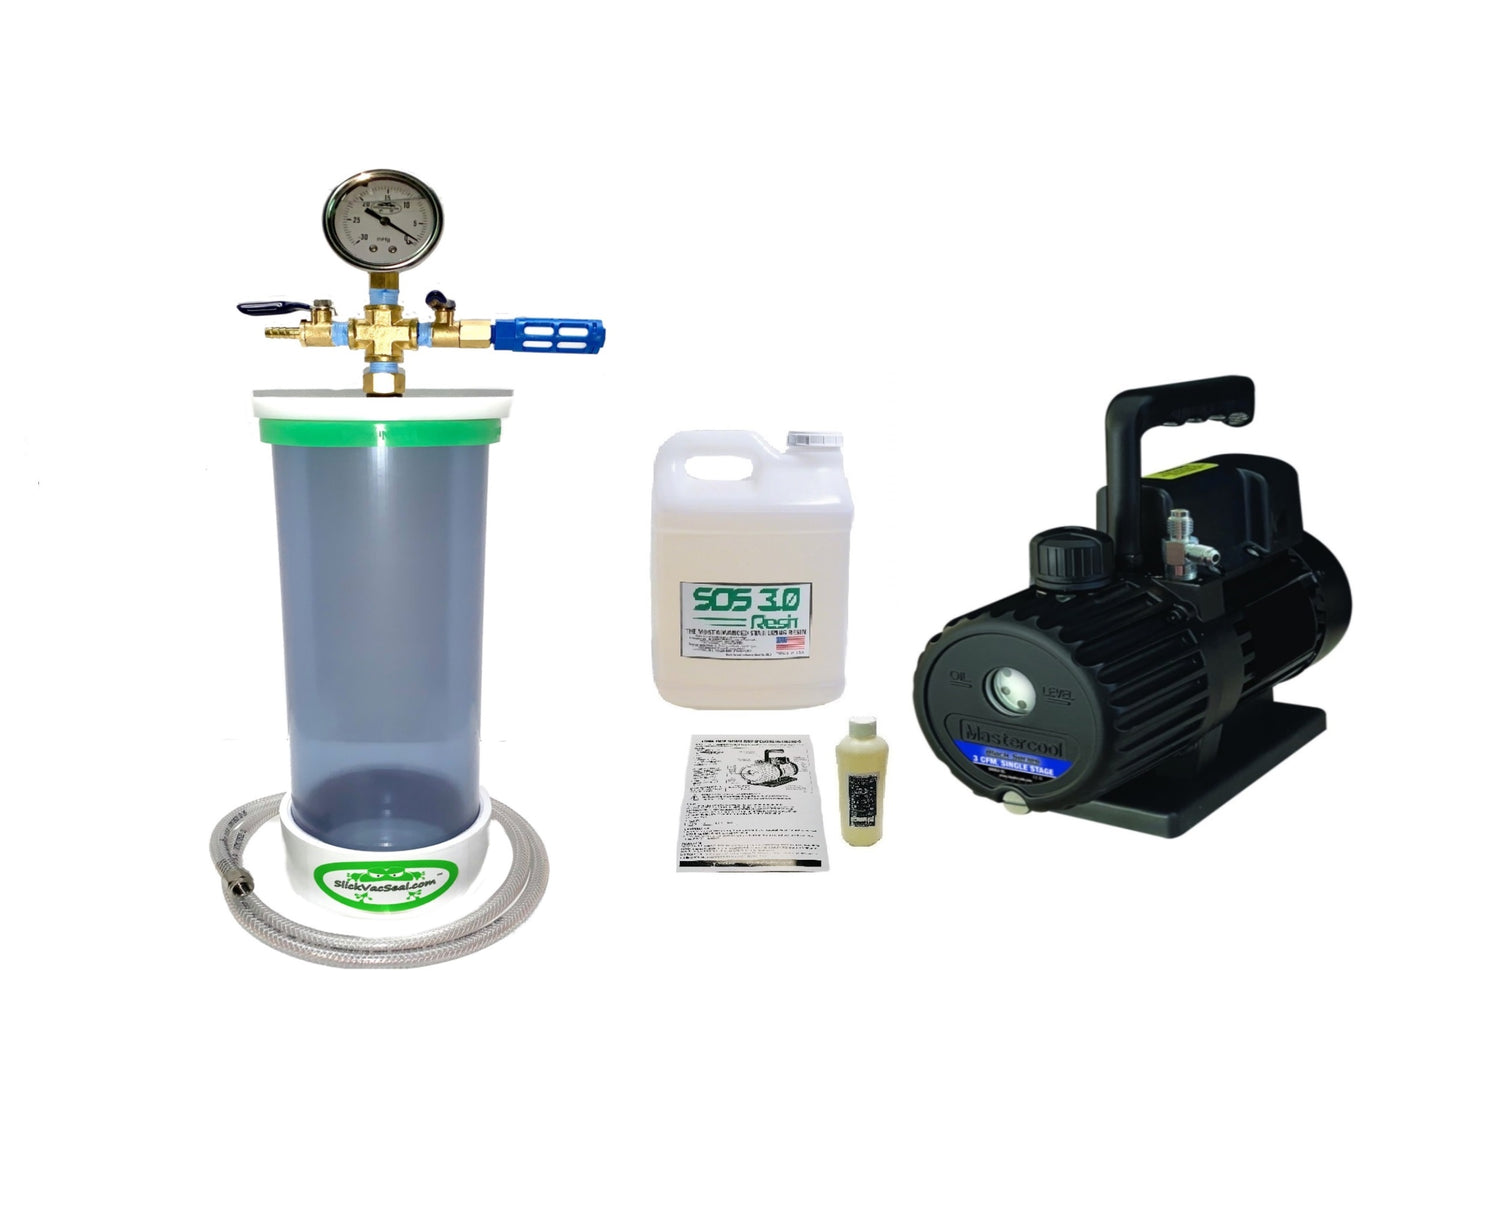 Chamber + SOS 3.0 Wood Stabilizer + Vacuum Pump Complete Systems